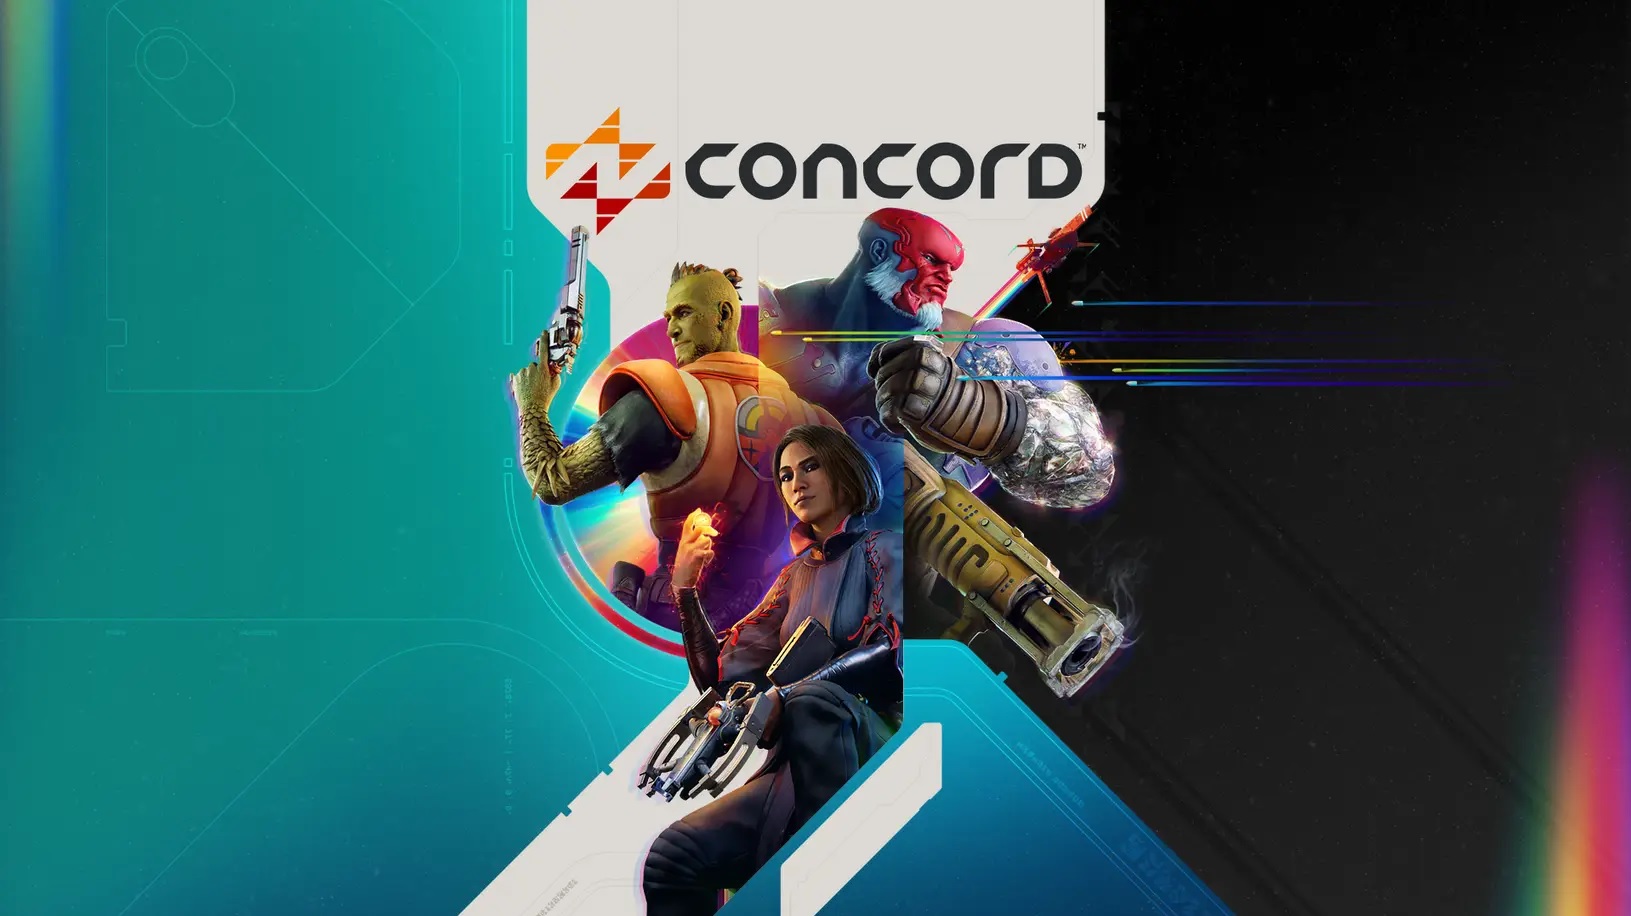 Concord is a sci-fi multiplayer shooter with a focus on characters